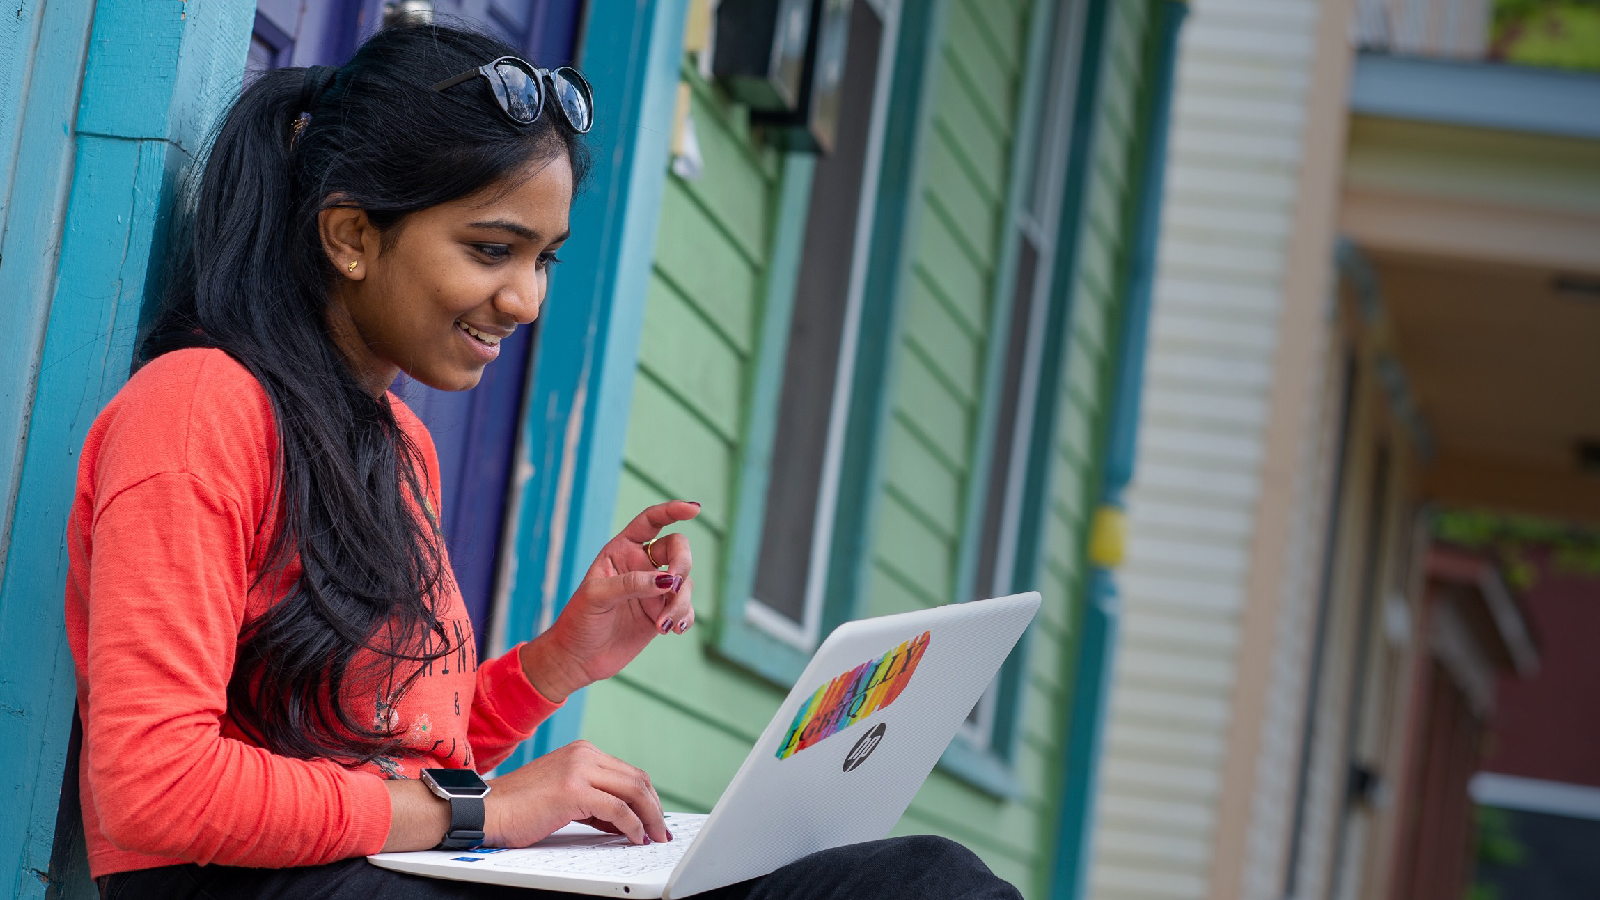 A woman works on a laptop while sitting in front of a colorful house